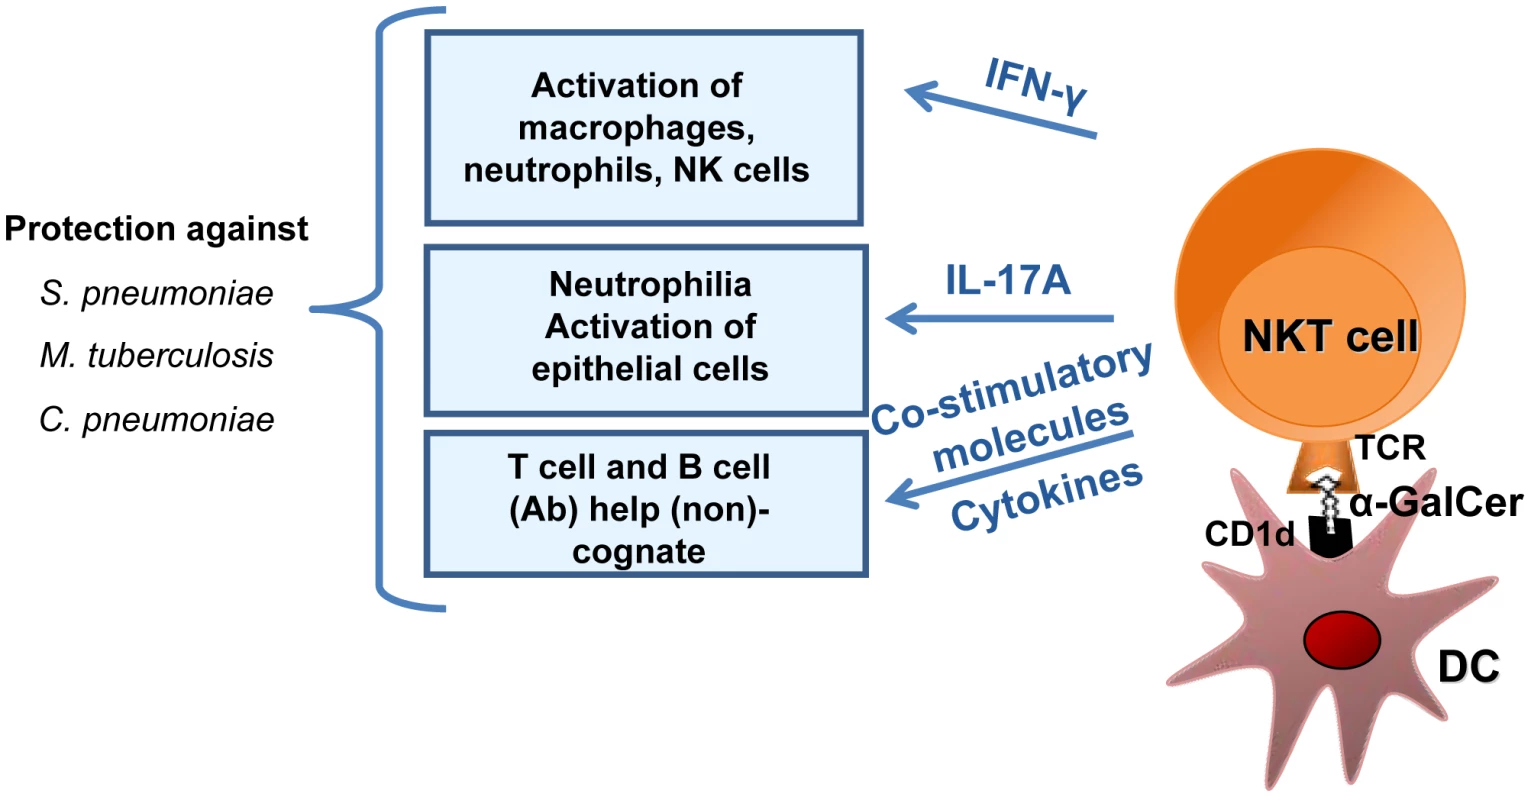 Mechanisms of NKT cell–based antibacterial immunity in response to exogenous α-galactosylceramide activation.